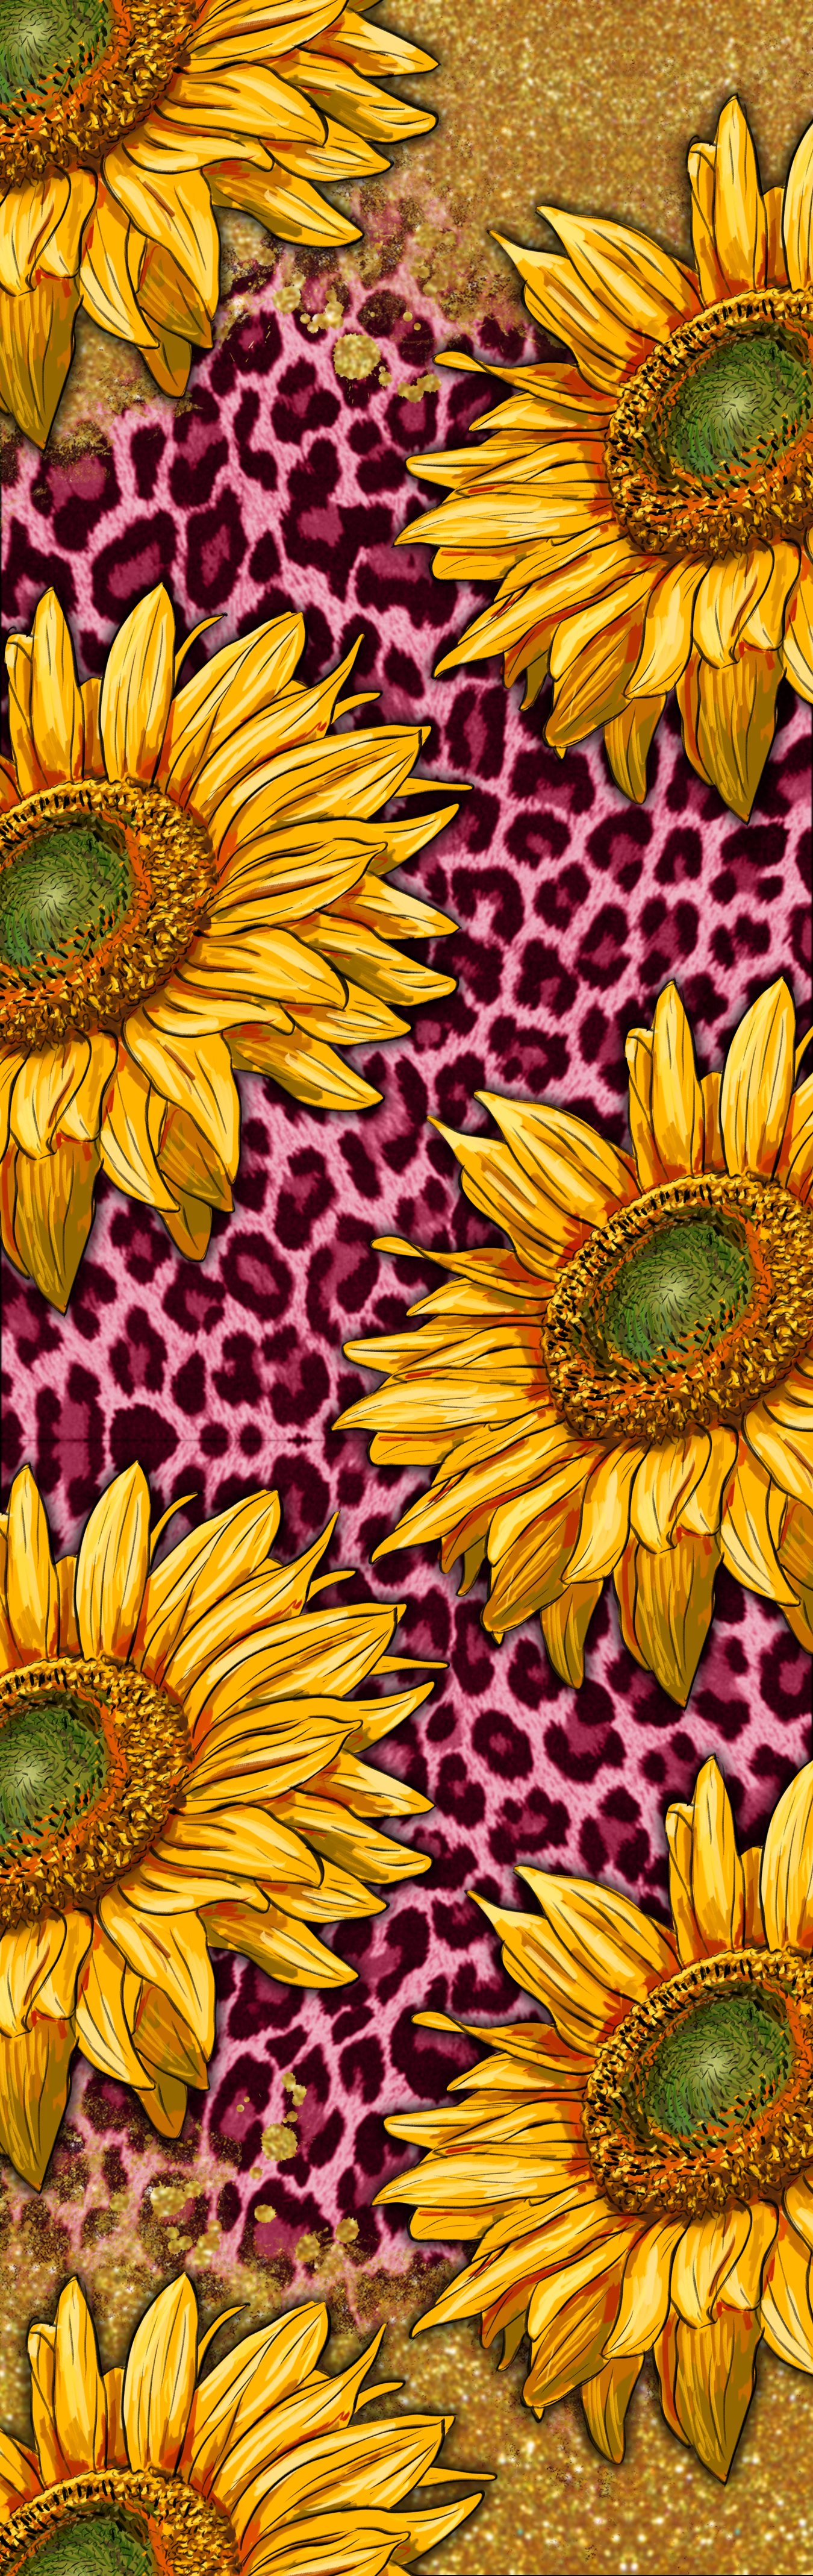 SUNFLOWER WITH PINK LEOPARD